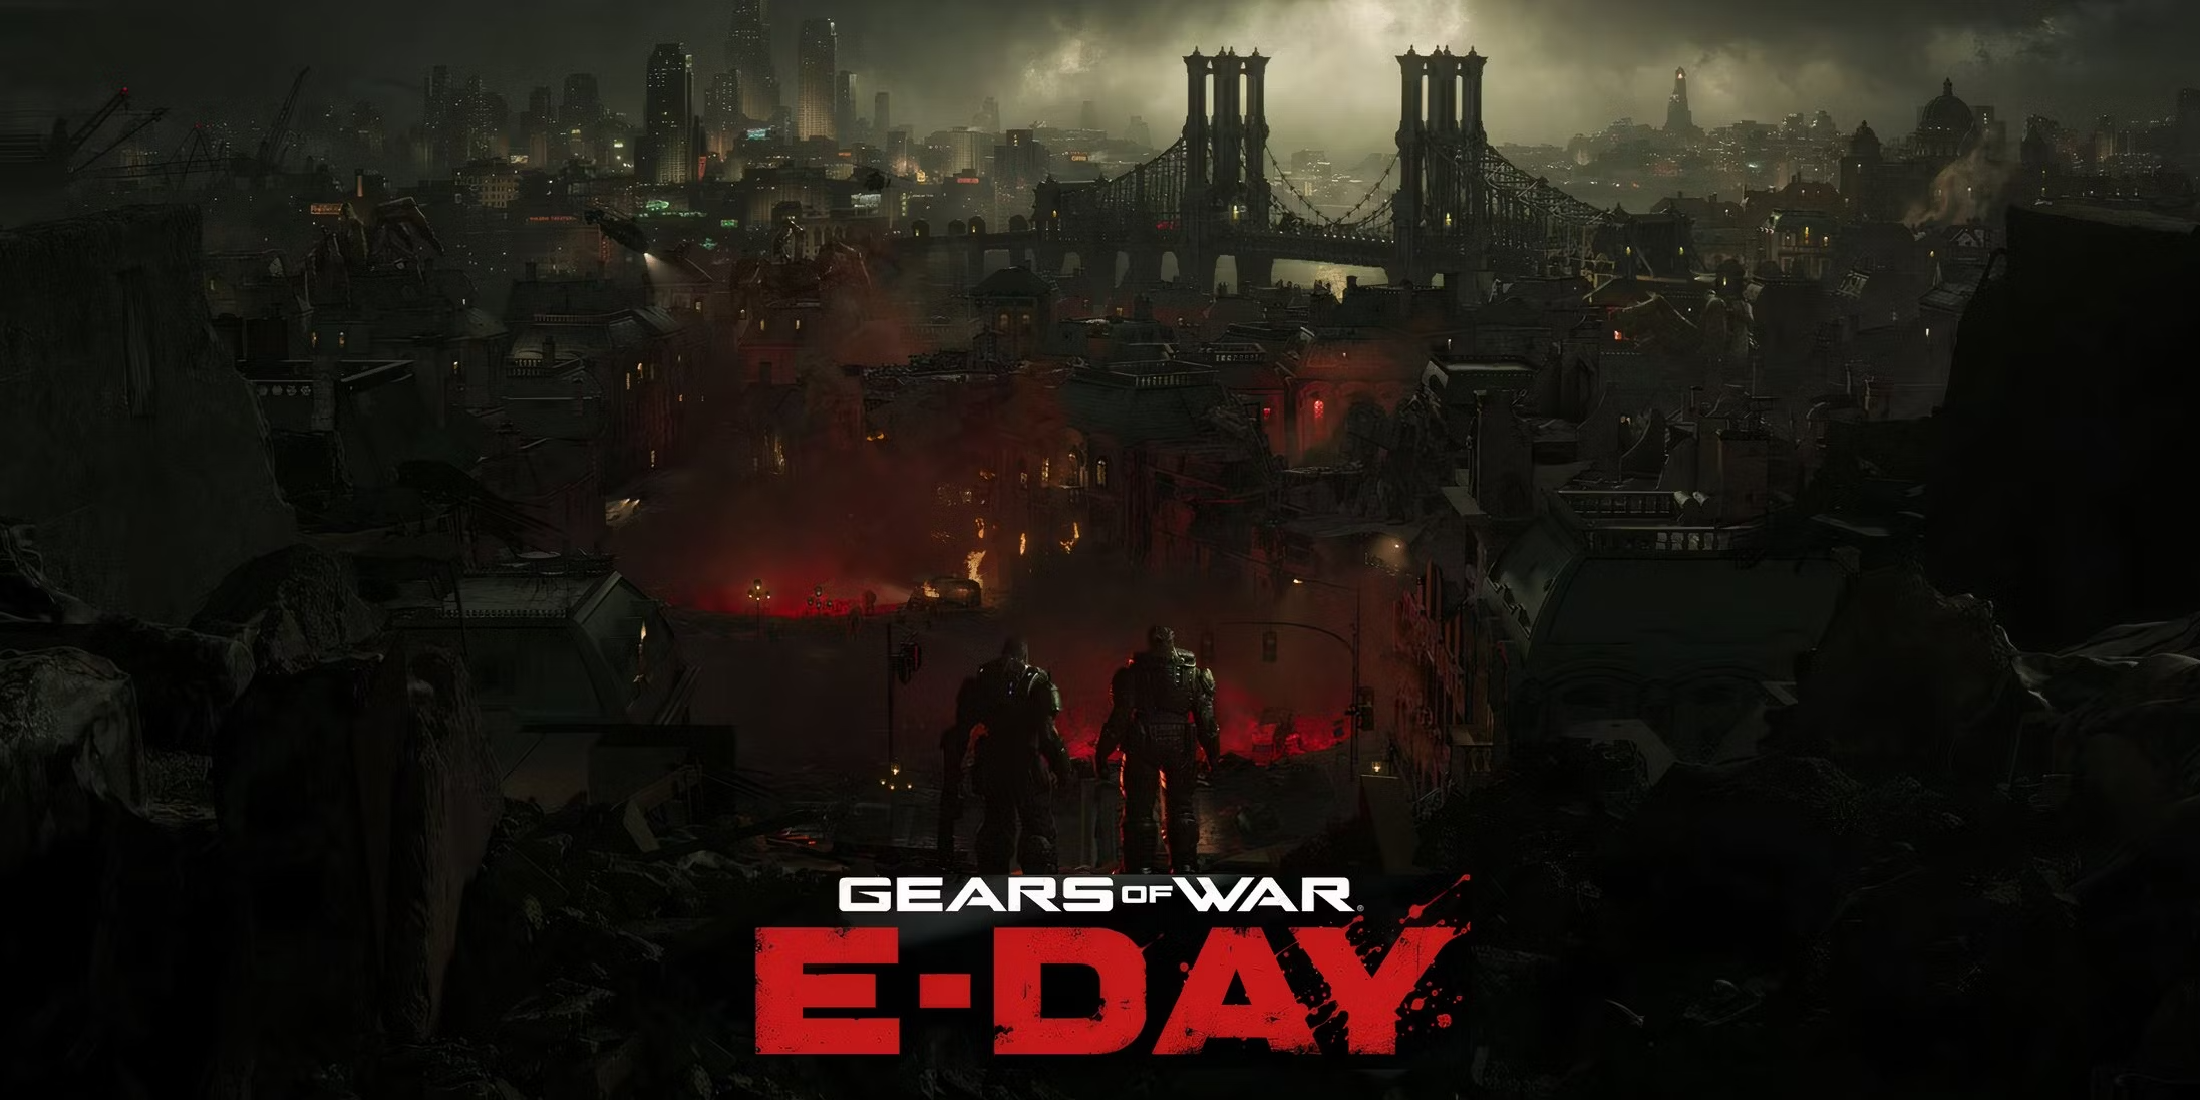 How Gears of War E-Day would benefit from focusing on Jacinto